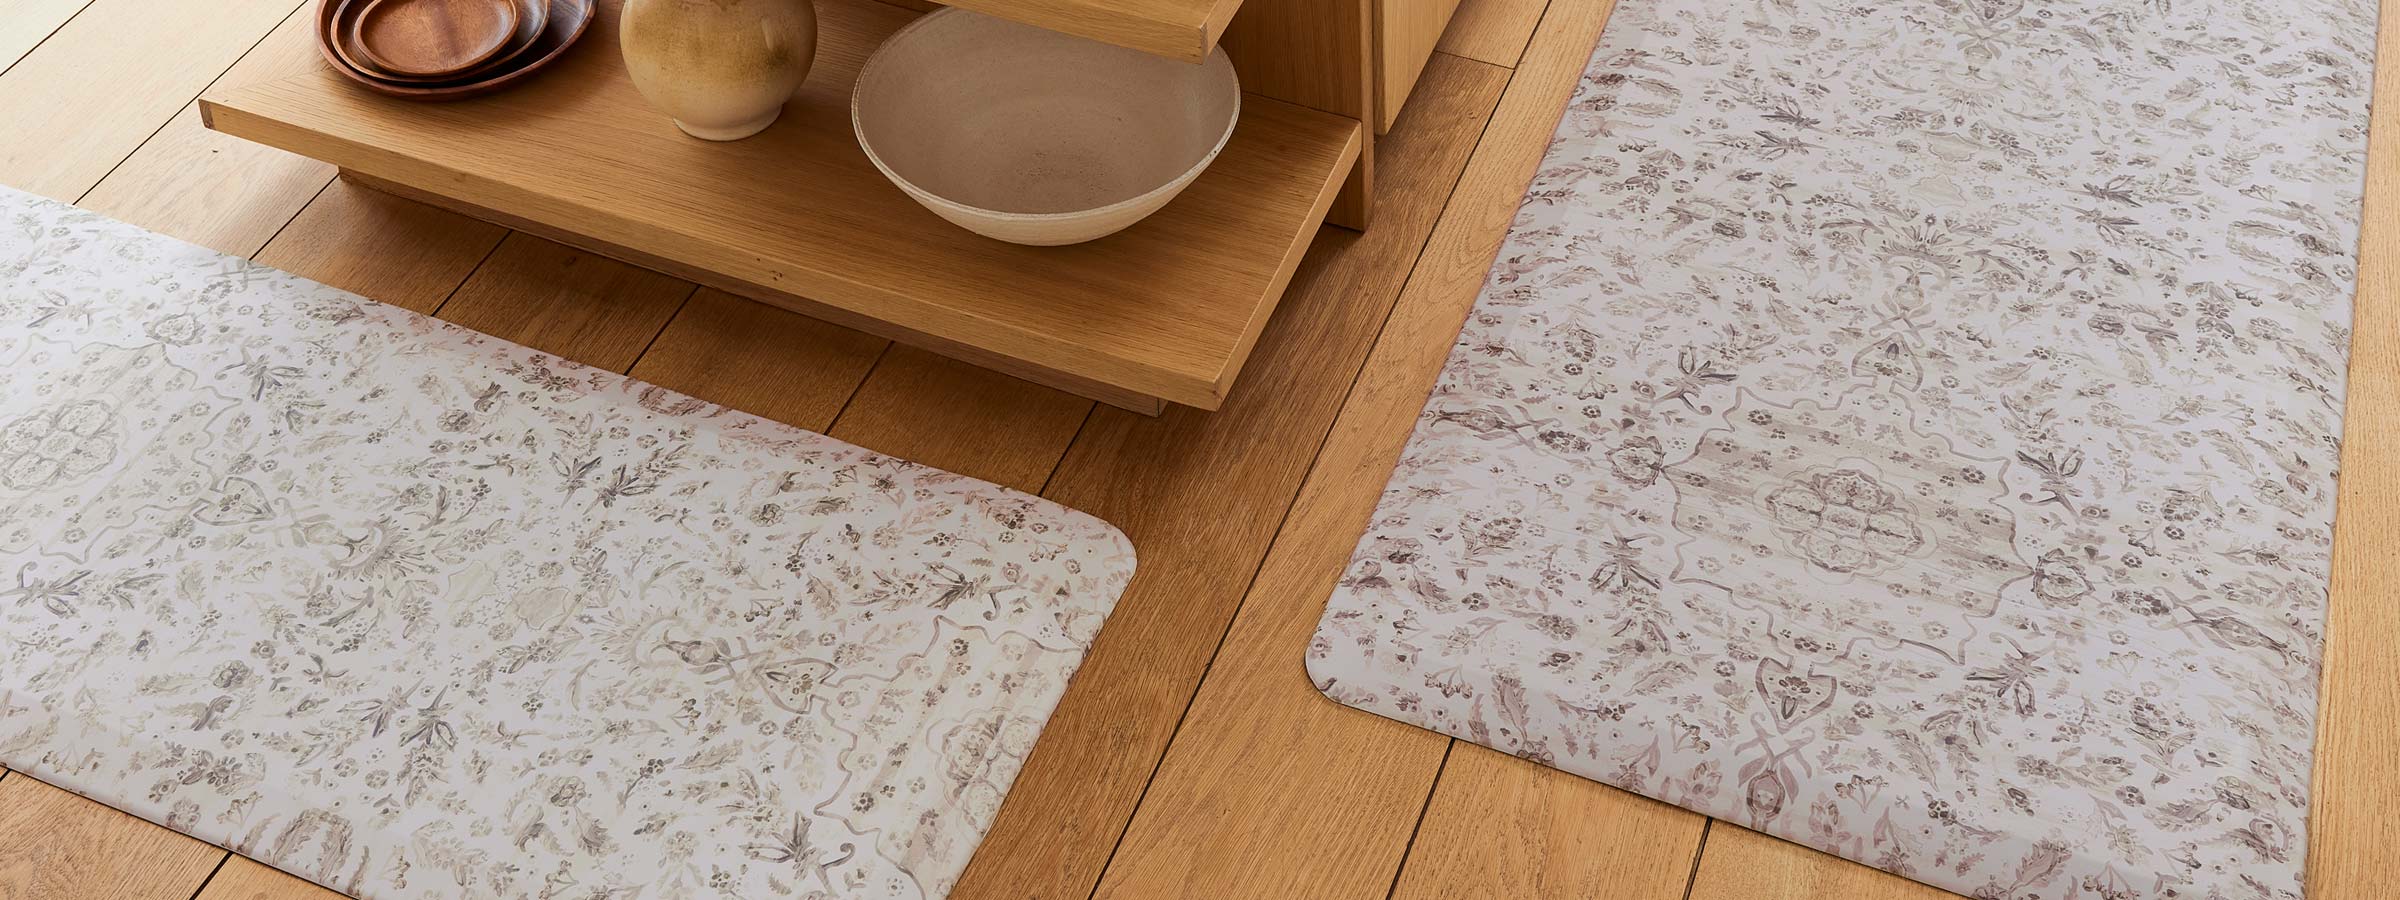 emile latte neutral floral print standing mat shown on wooden kitchen floor in sizes 22x36 and 22x72